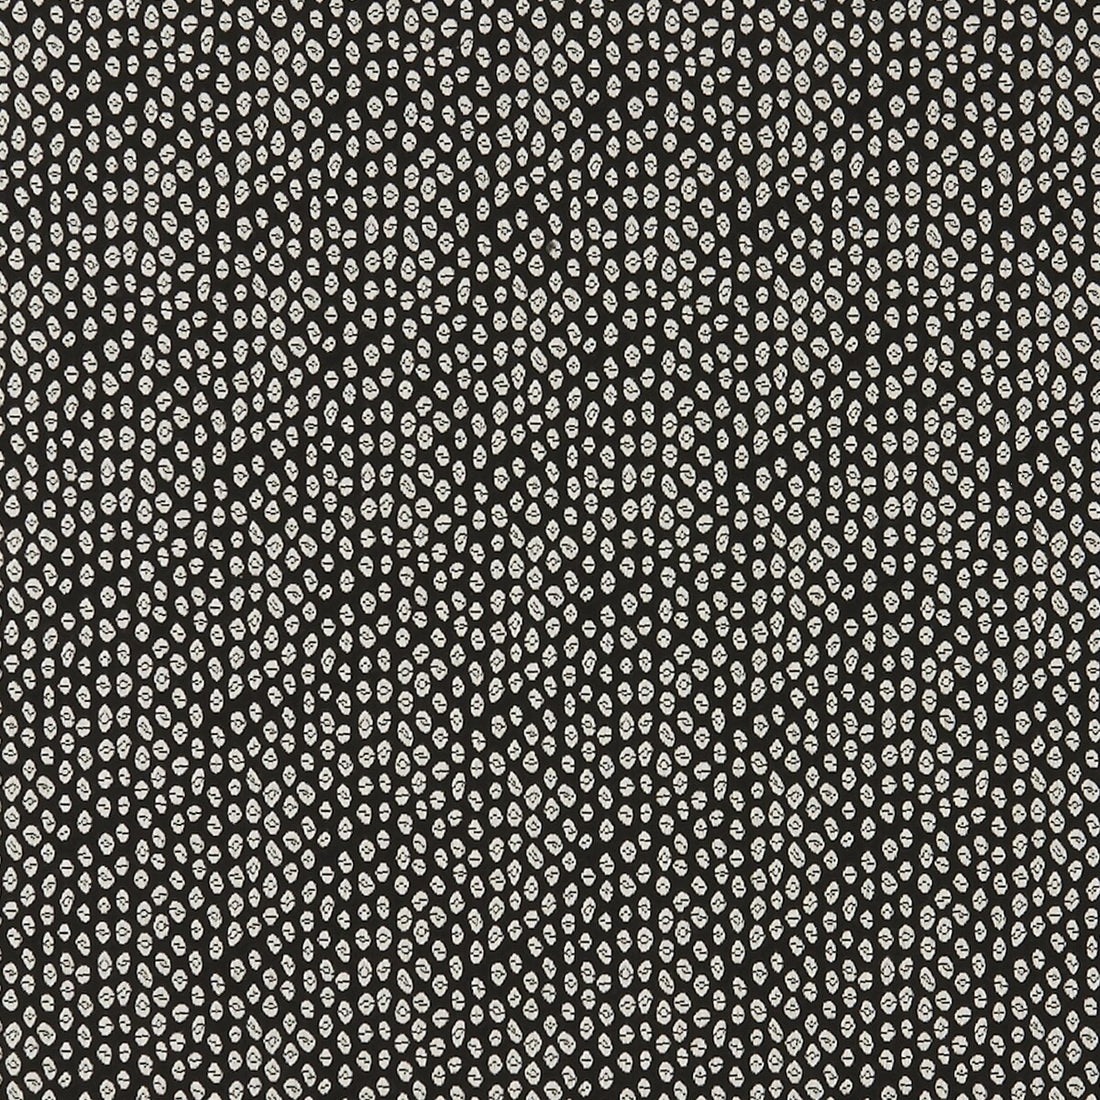 Bw1015 fabric in black/white color - pattern F0888/01.CAC.0 - by Clarke And Clarke in the Clarke &amp; Clarke Black + White collection